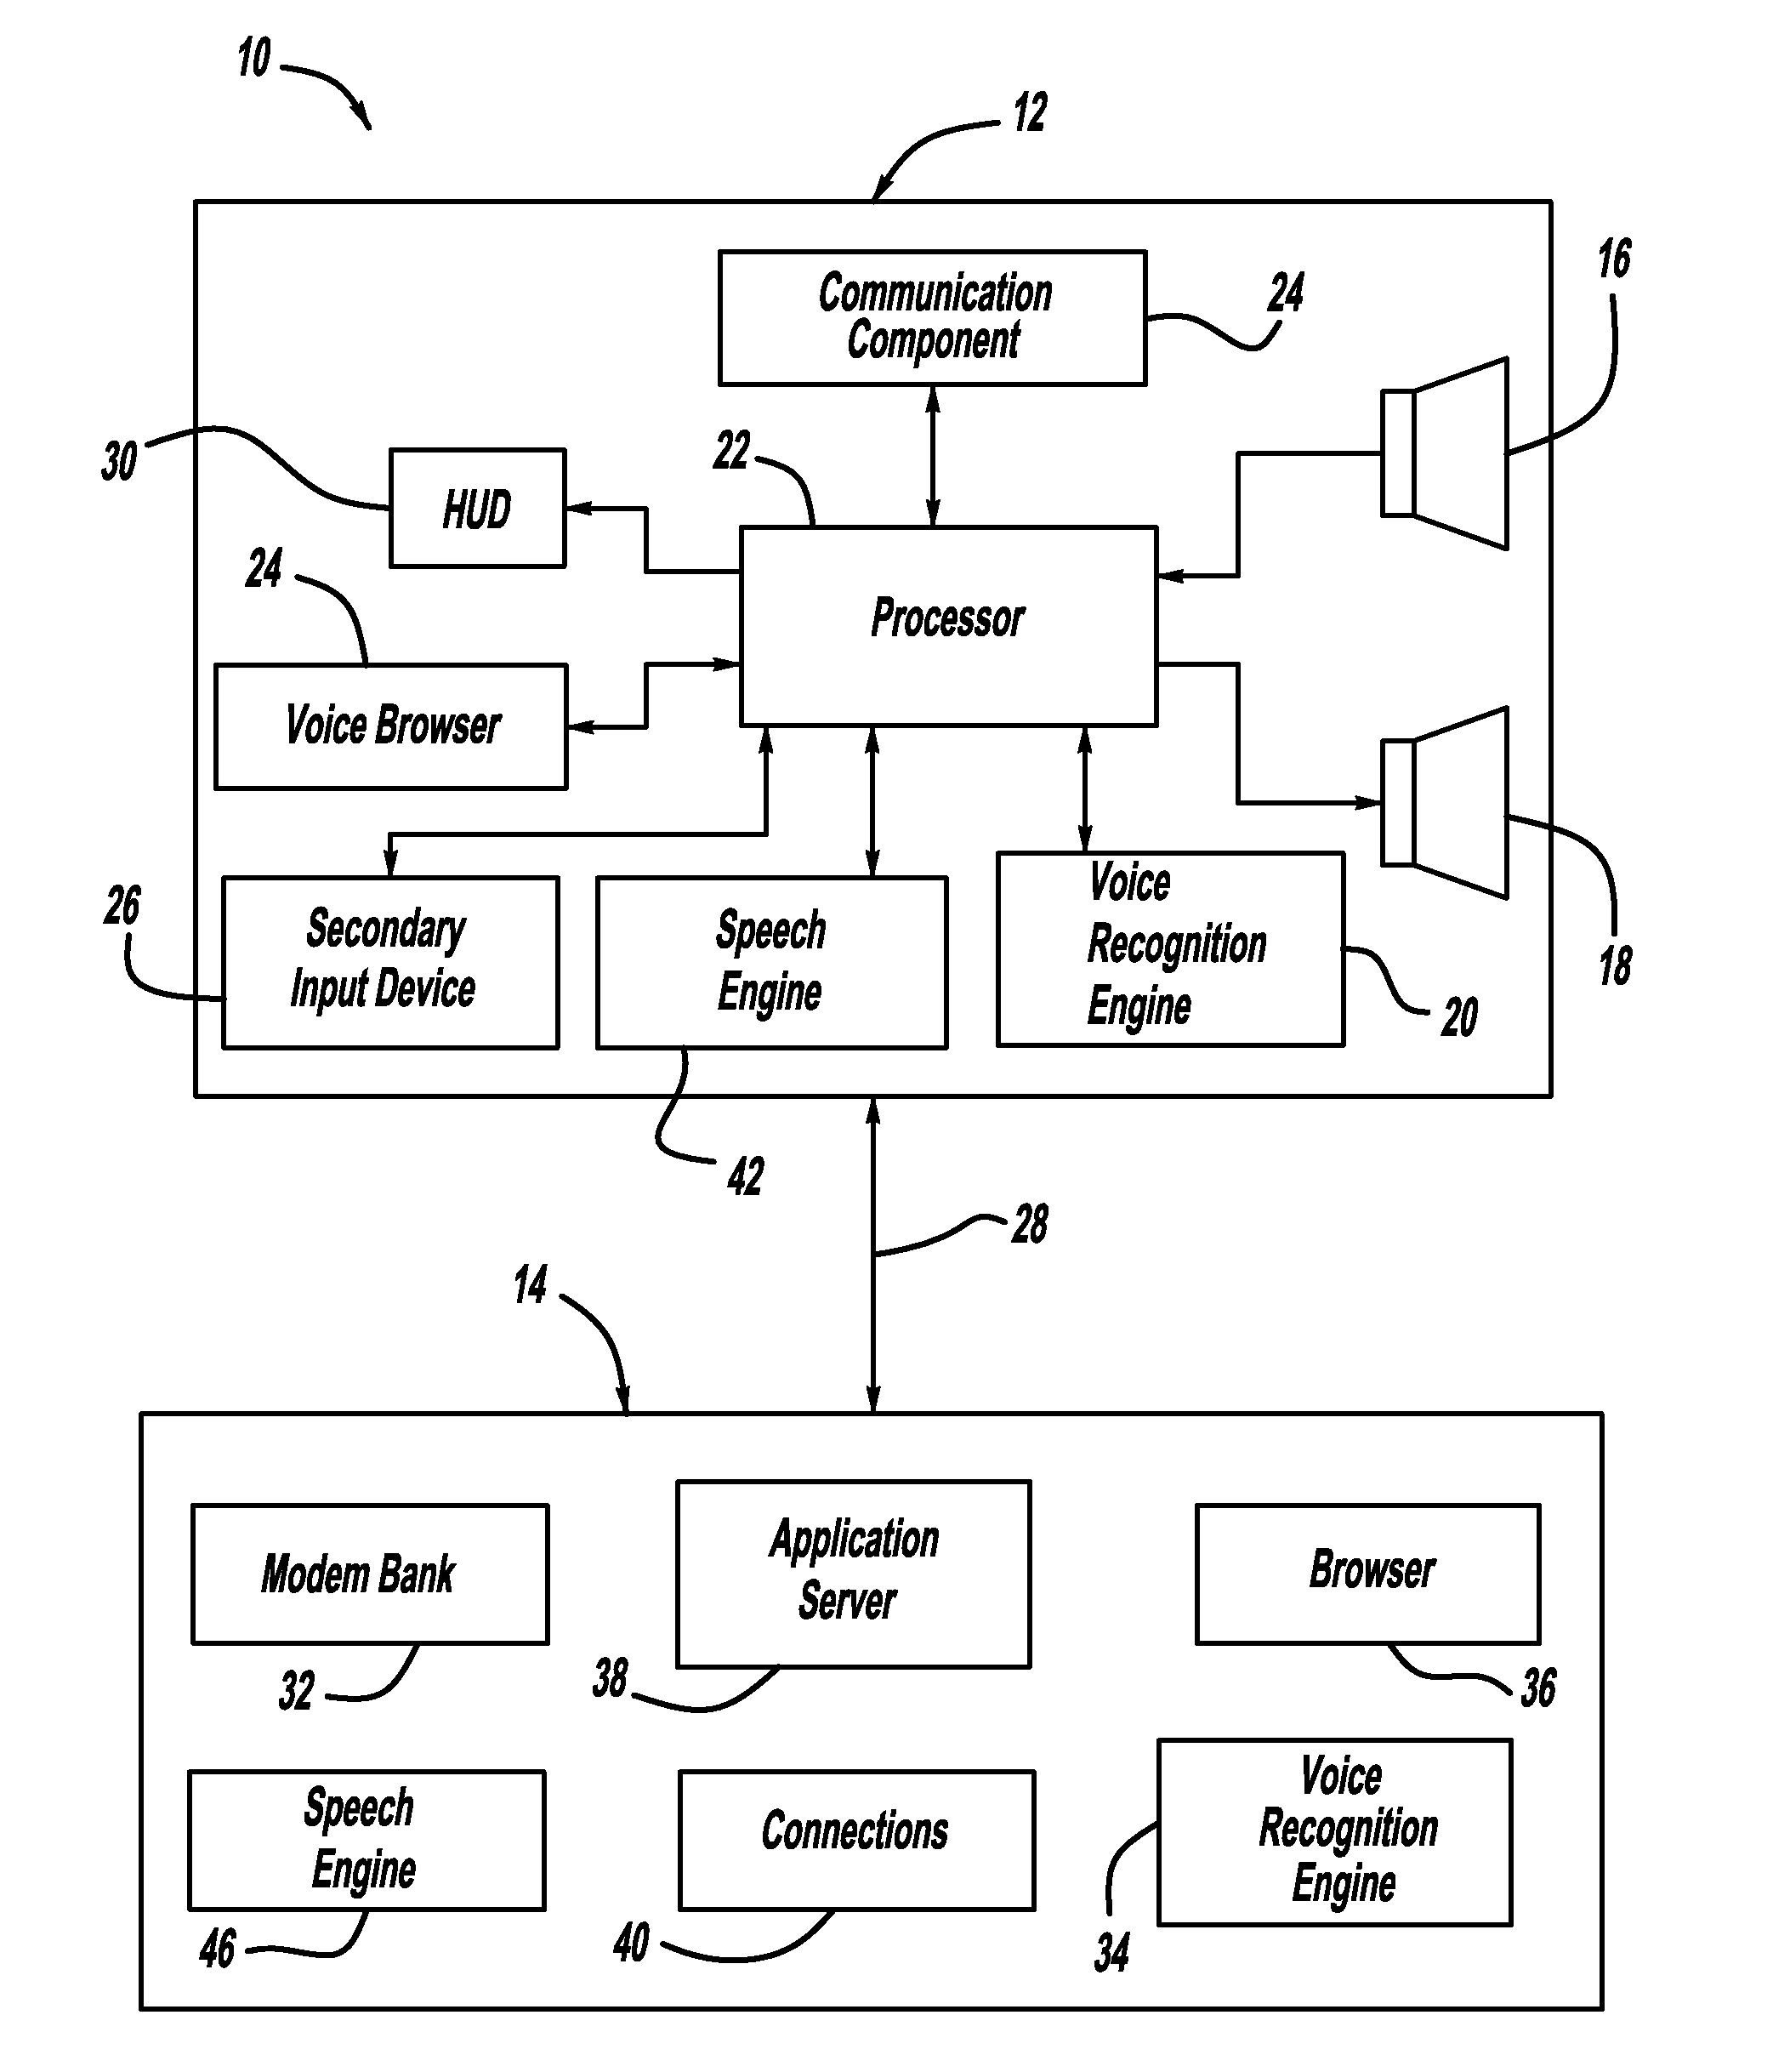 Multi-modal input system for a voice-based menu and content navigation service